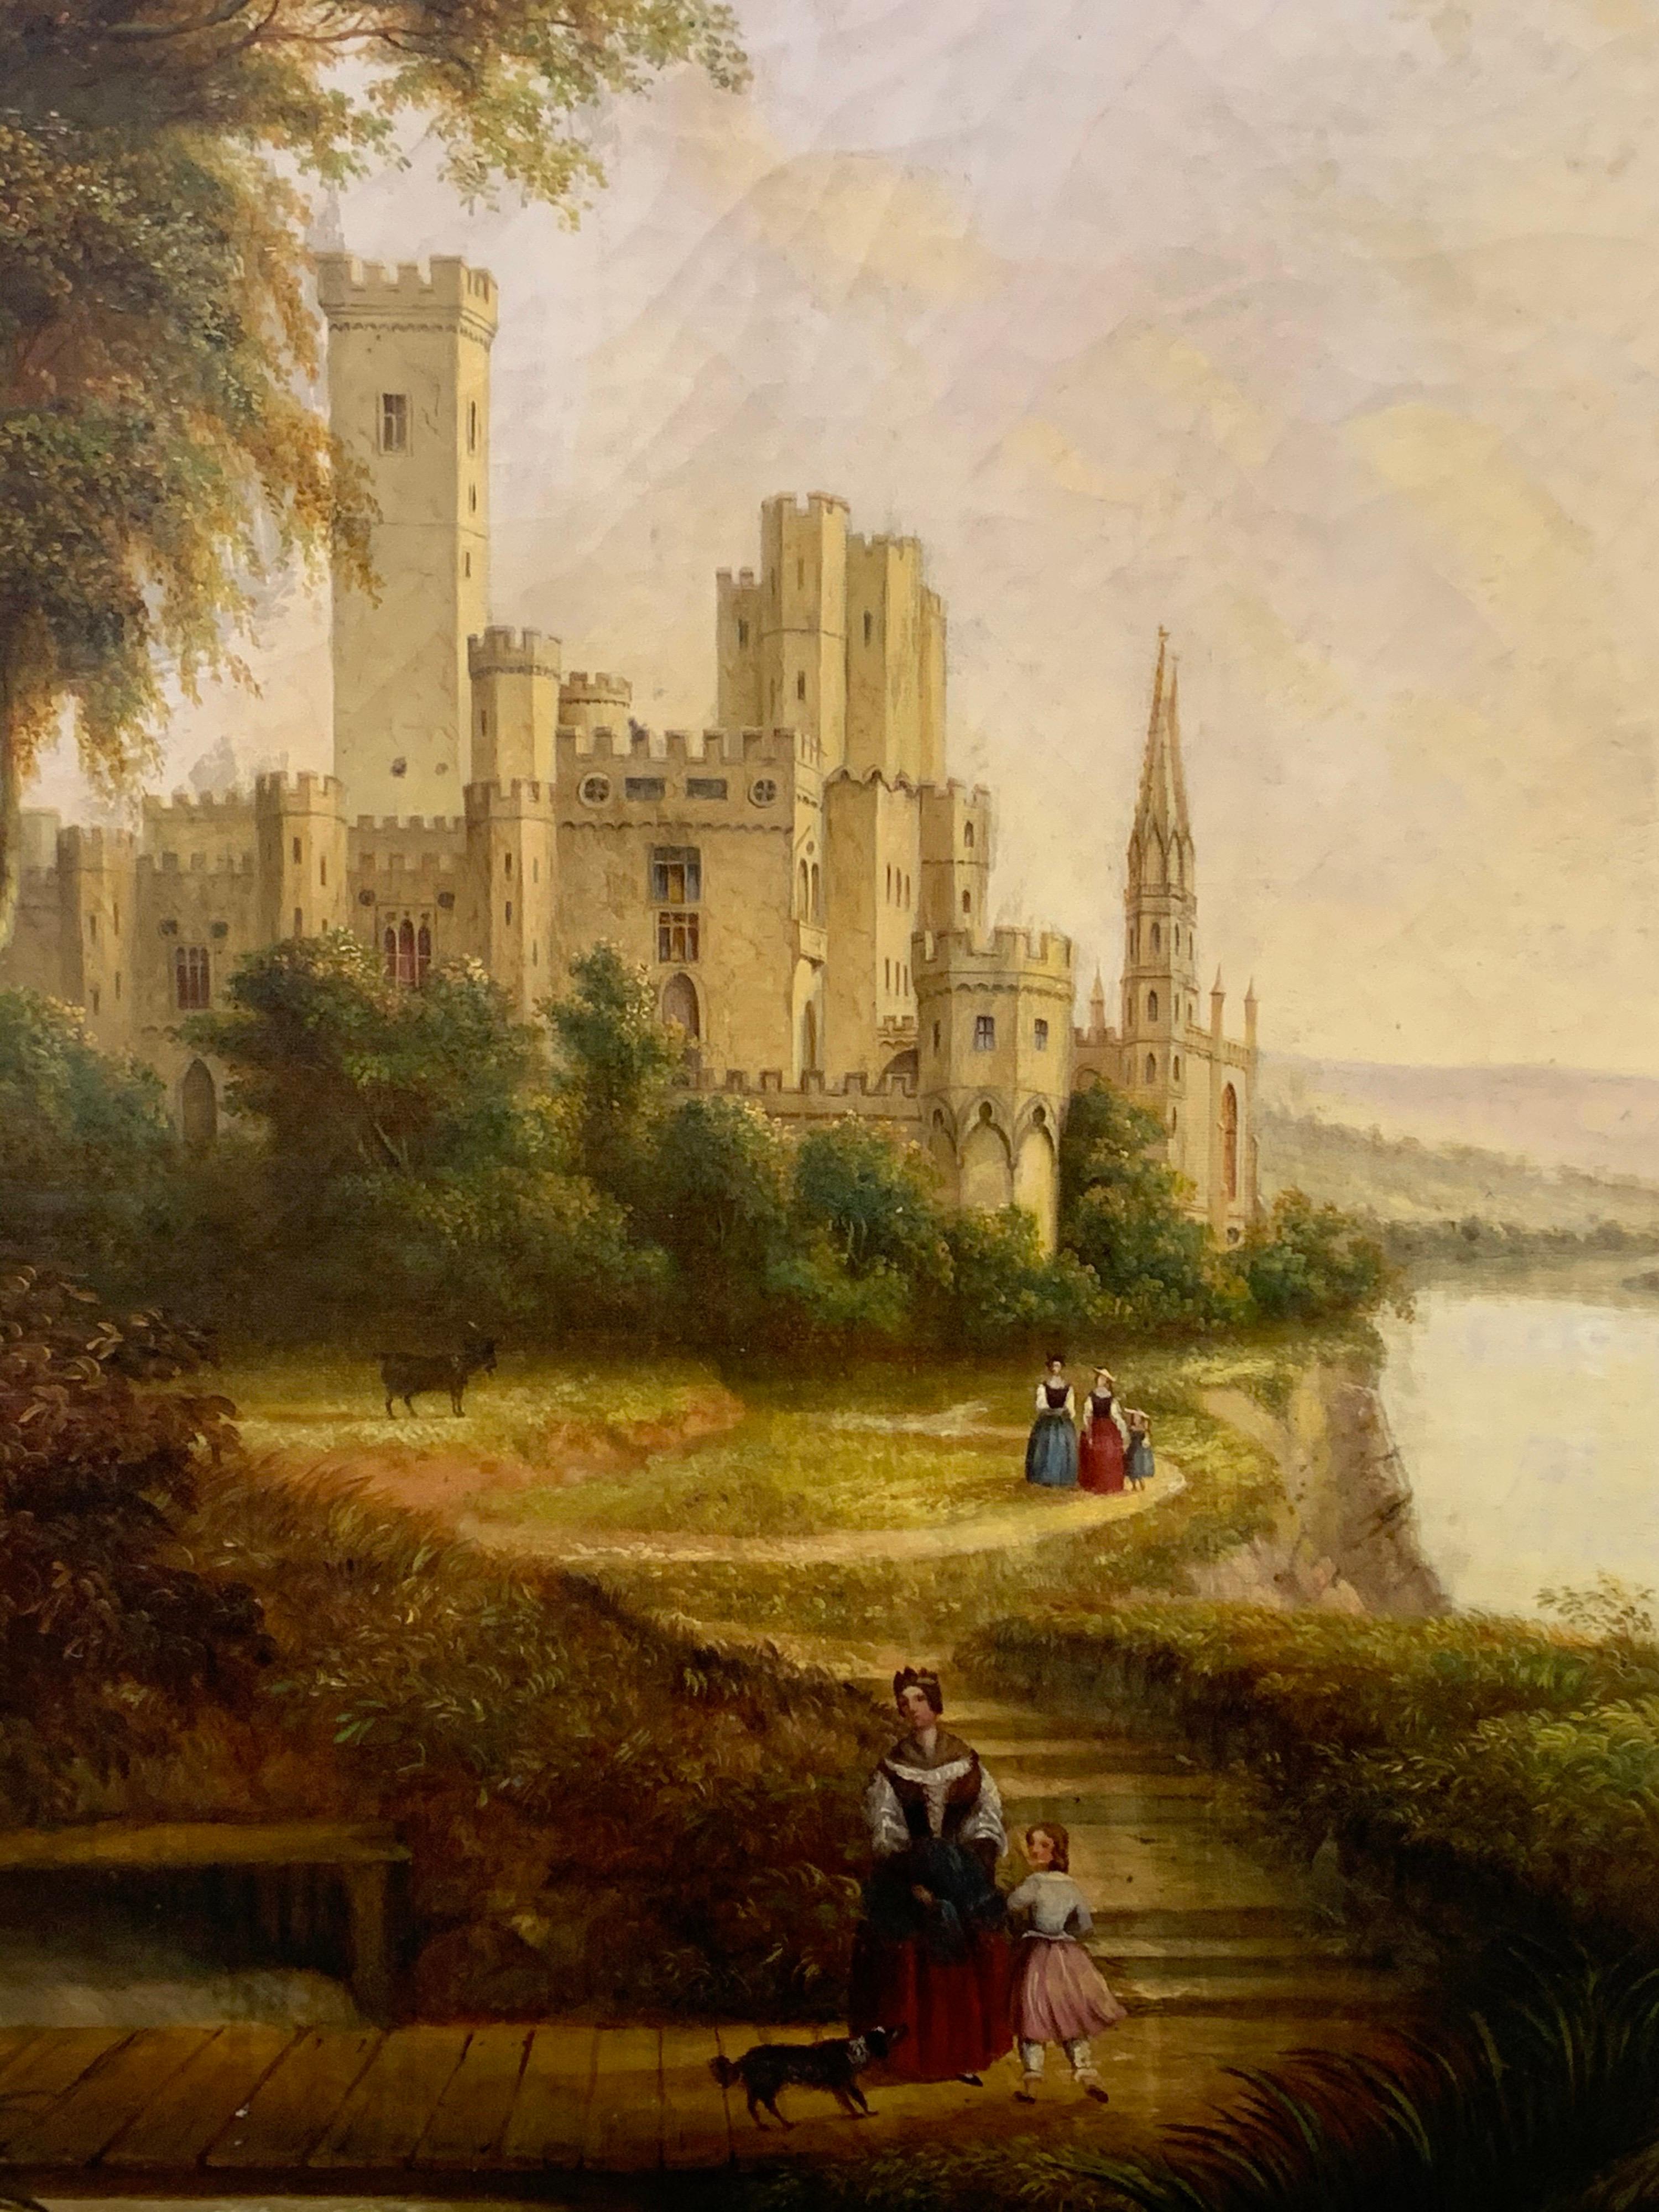 Elegant late 19th century antique original oil on canvas painting depicting a French countryside scene
with castle in background. Colors are vivid, frame is original and has some wear as it should. No artist
signature present. Actual painting has